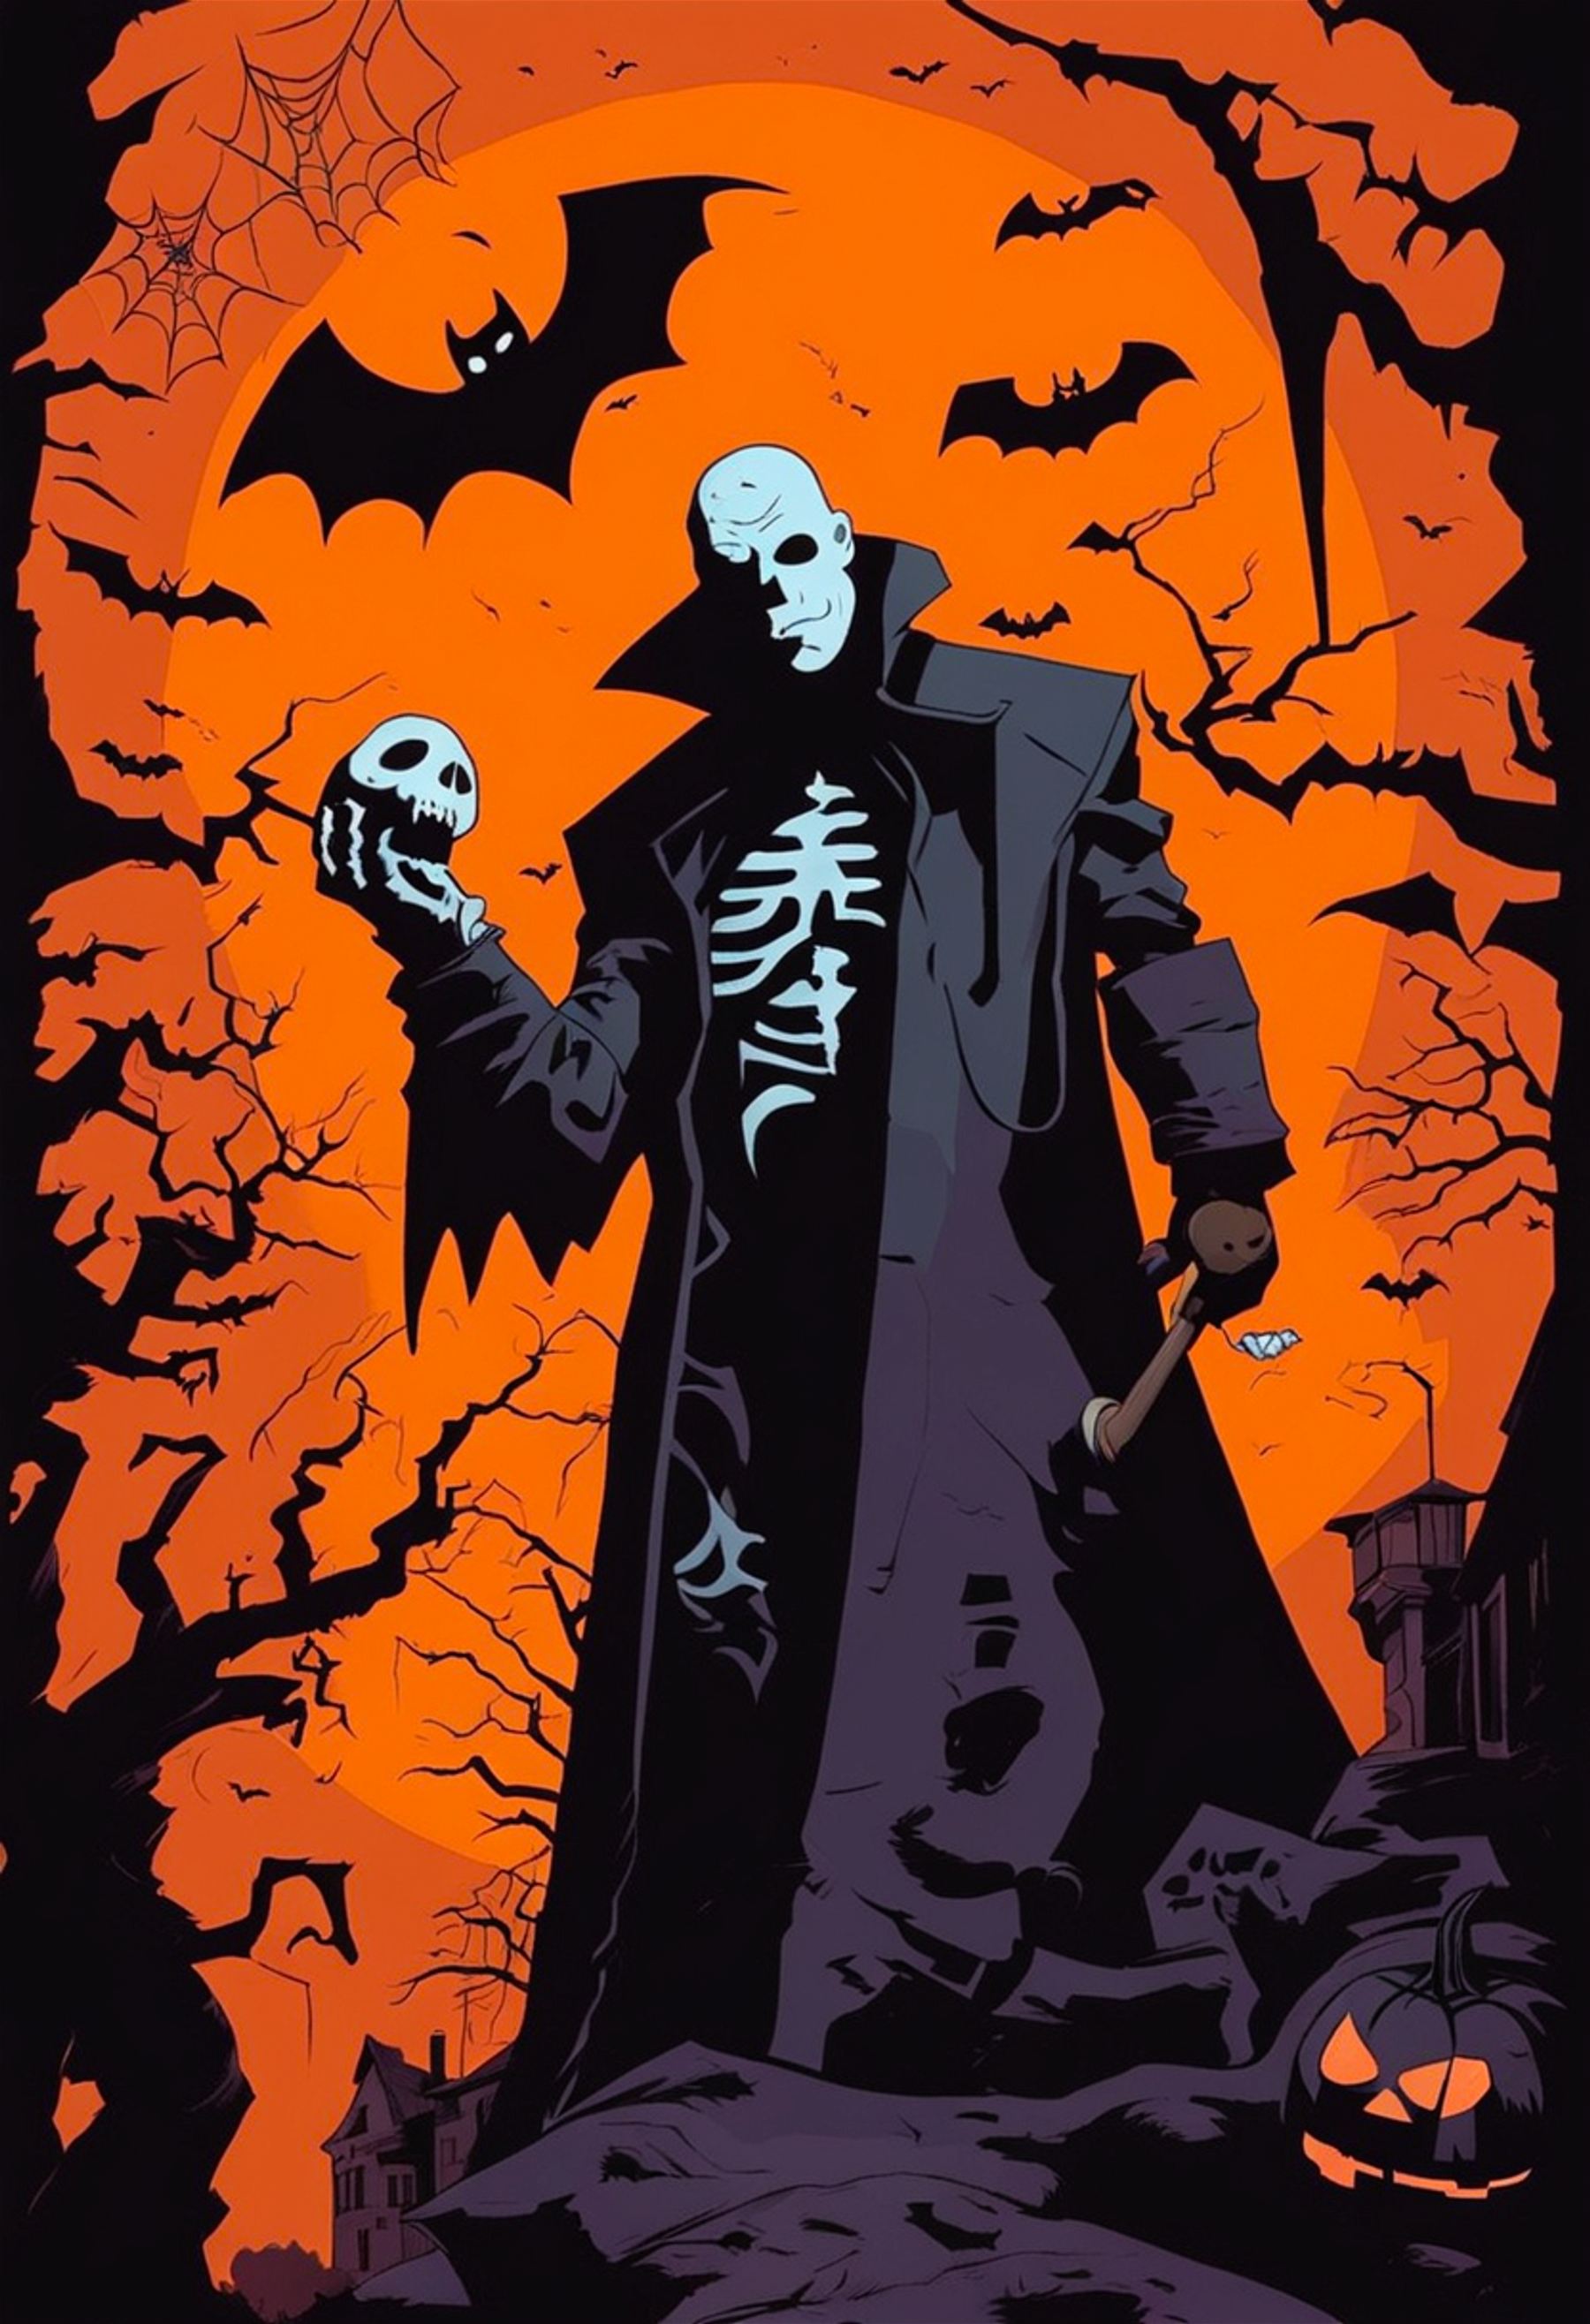 Halloween poster by Mike Mignola